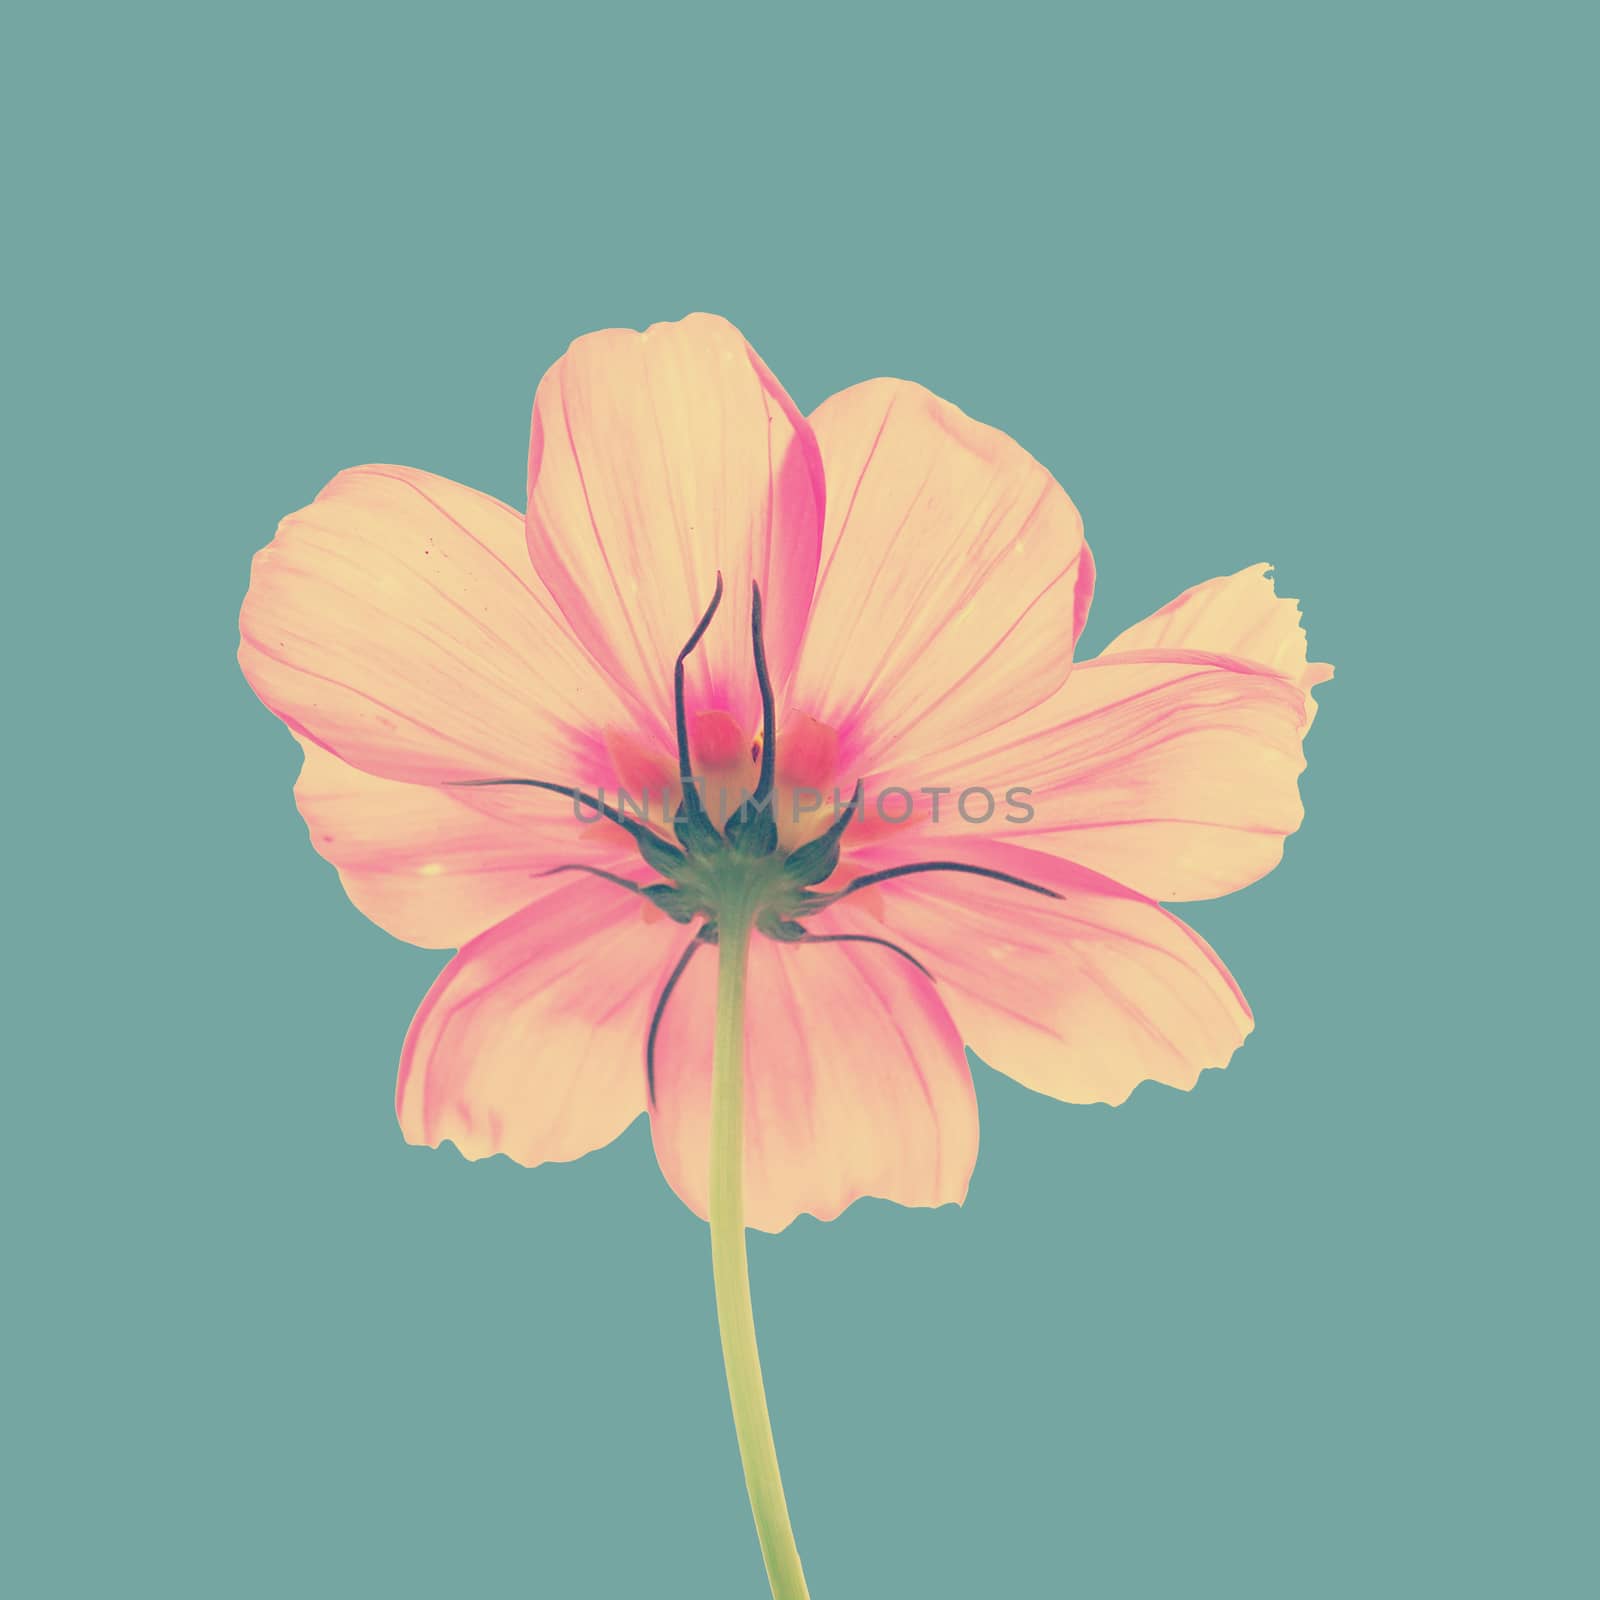 Pink flower of cosmos vintage tone style